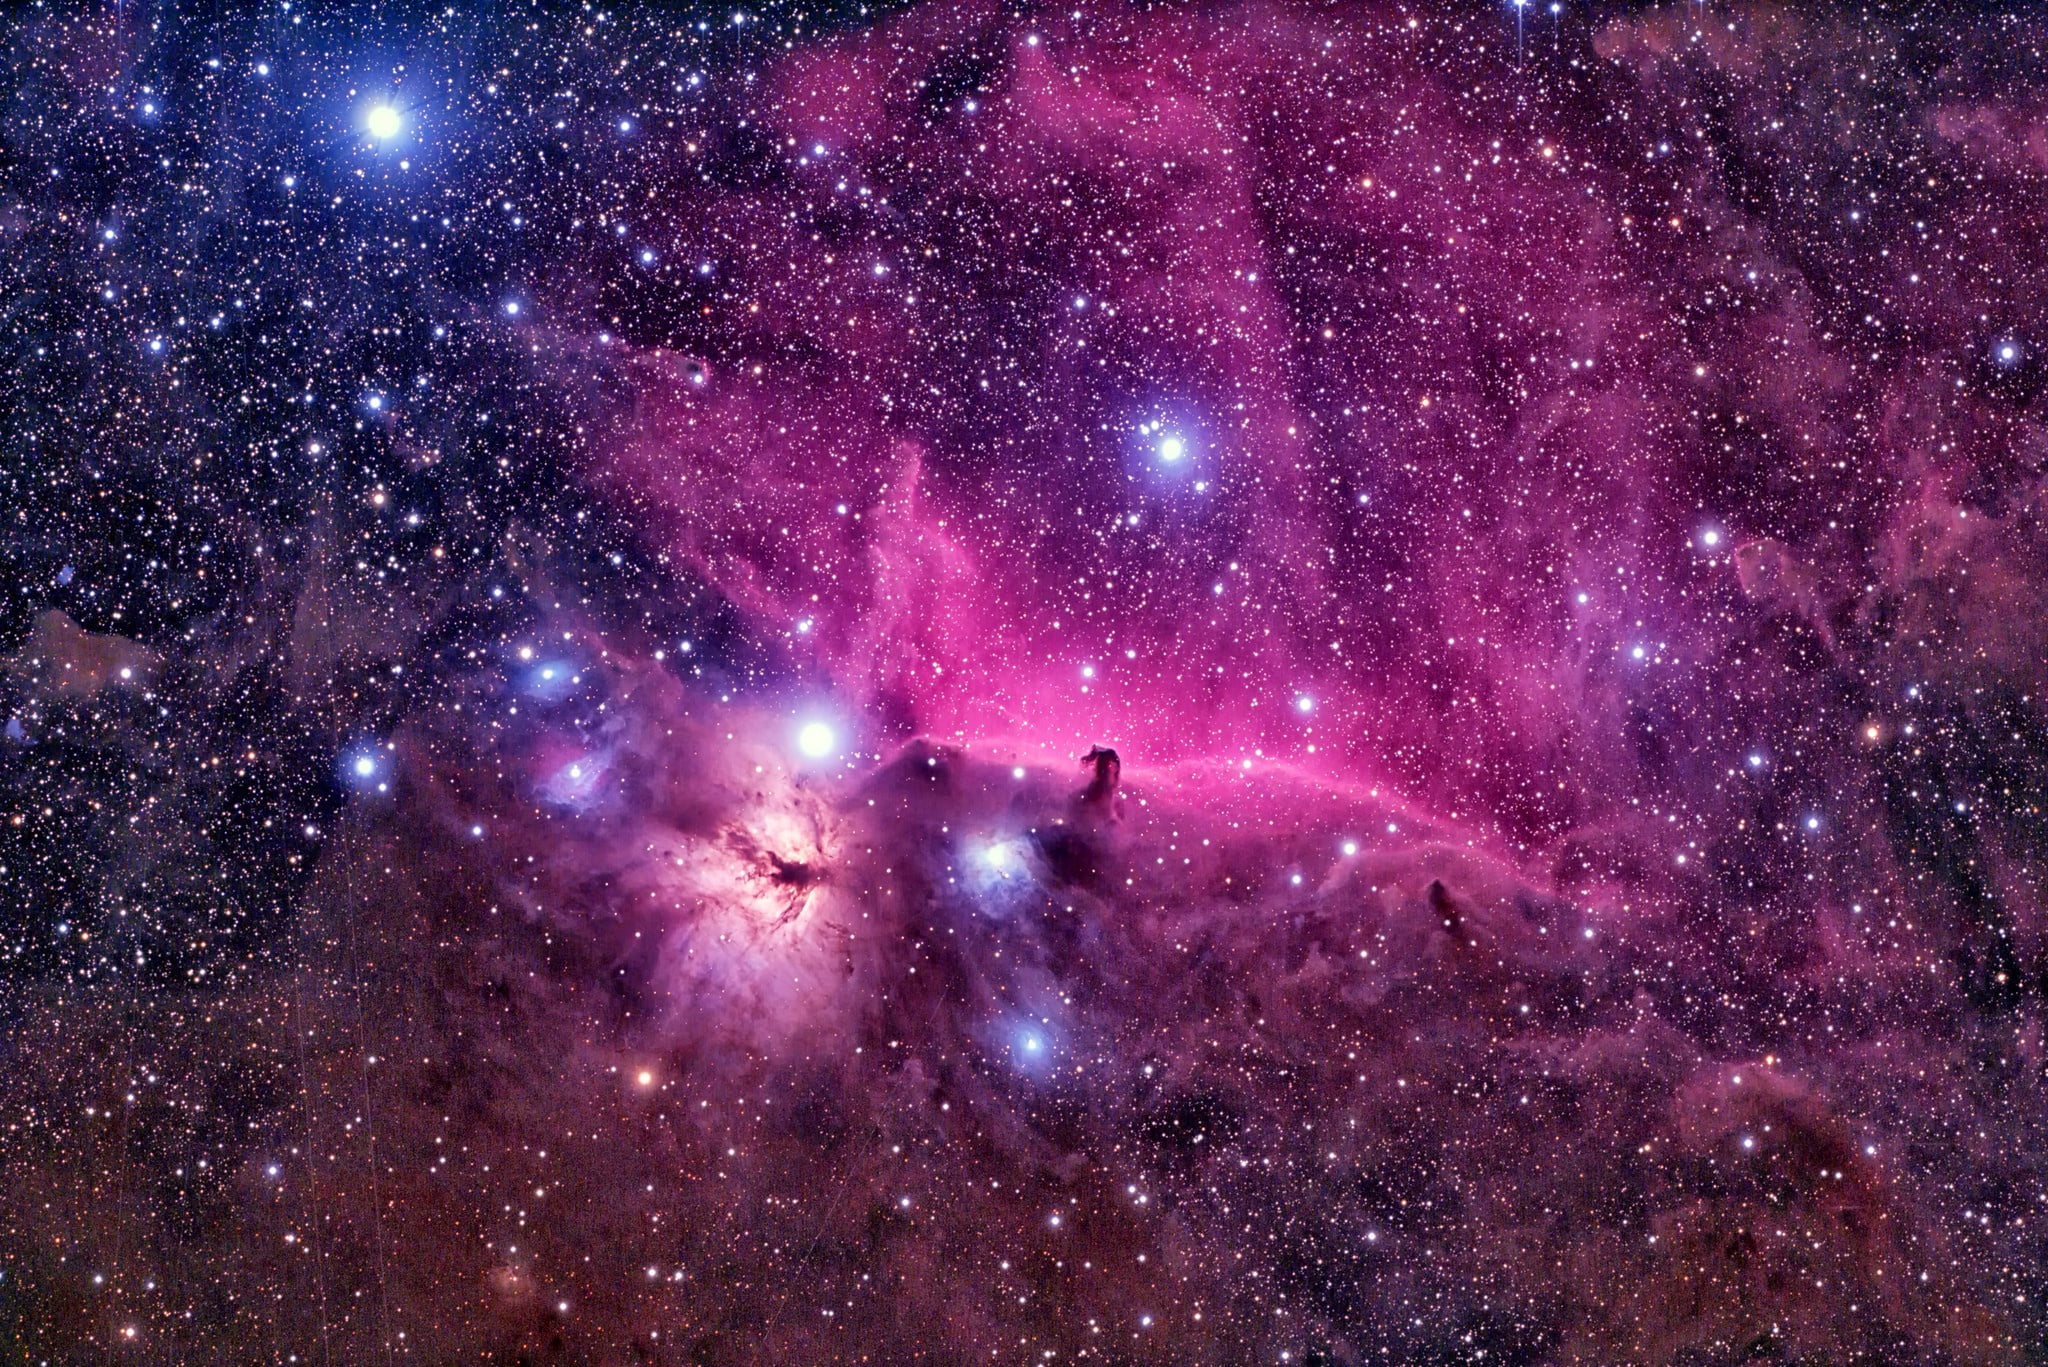 Pink Space Wallpapers